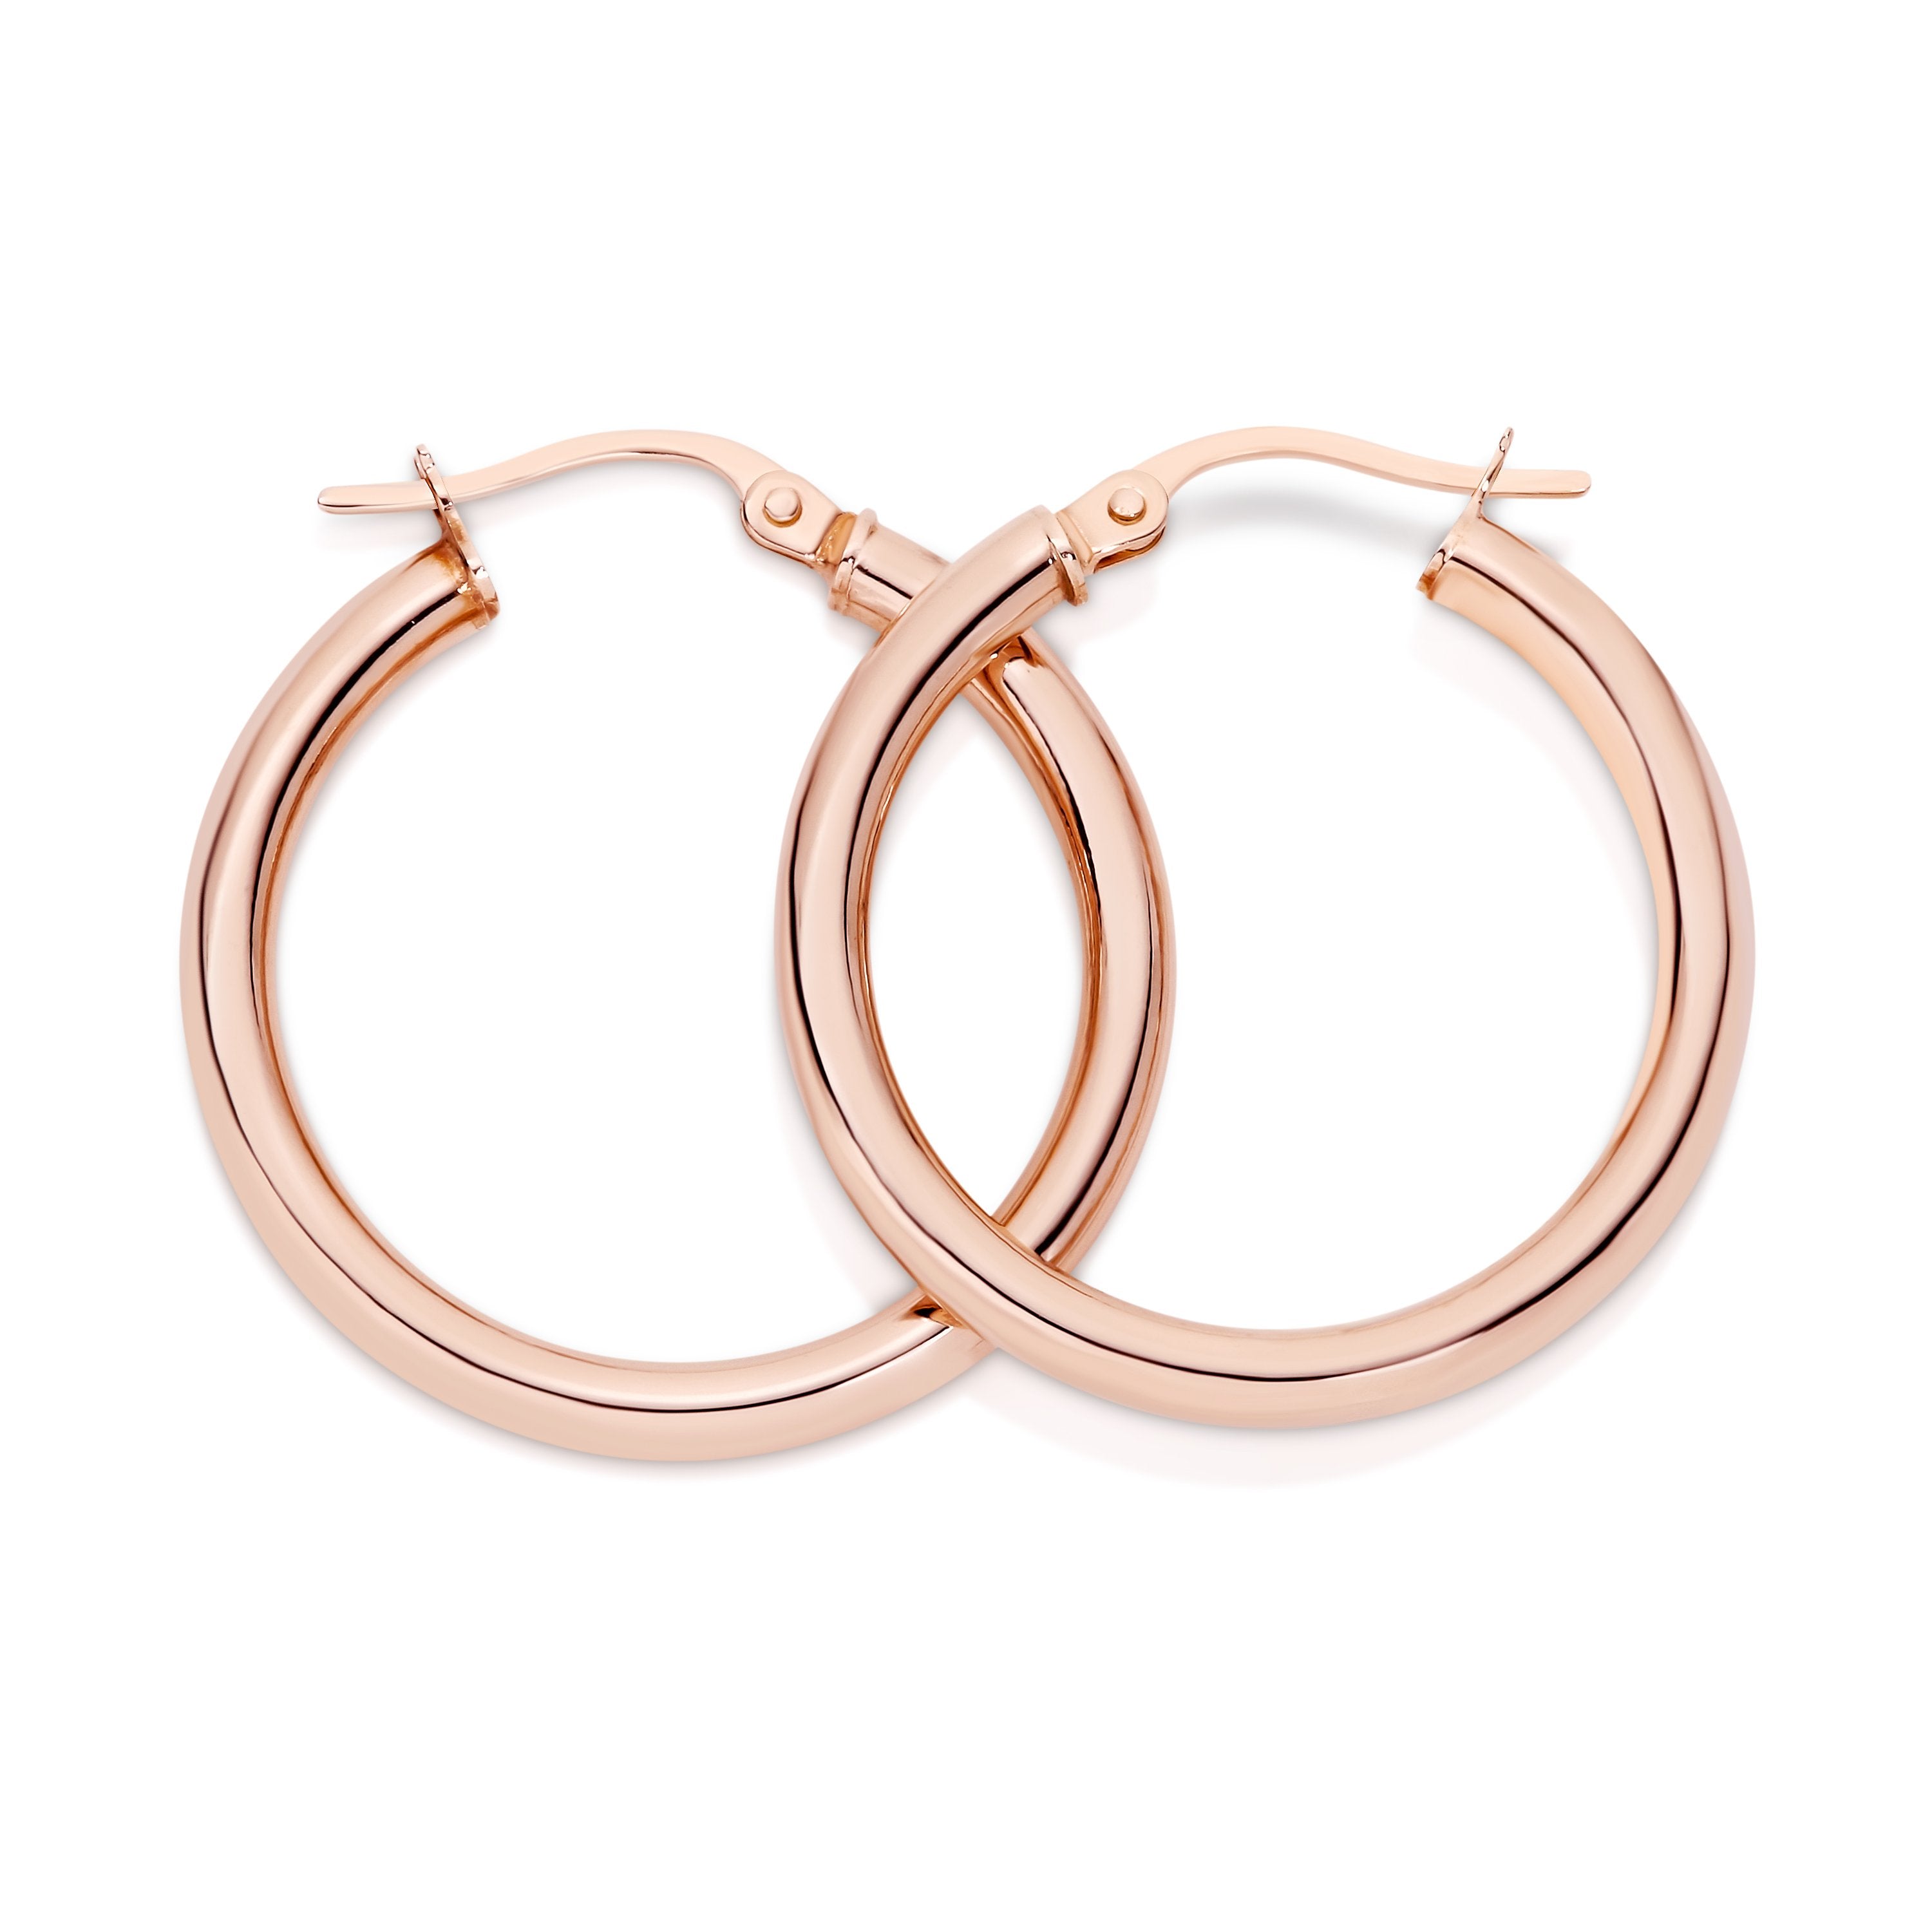 9ct rose gold hoops 20mm